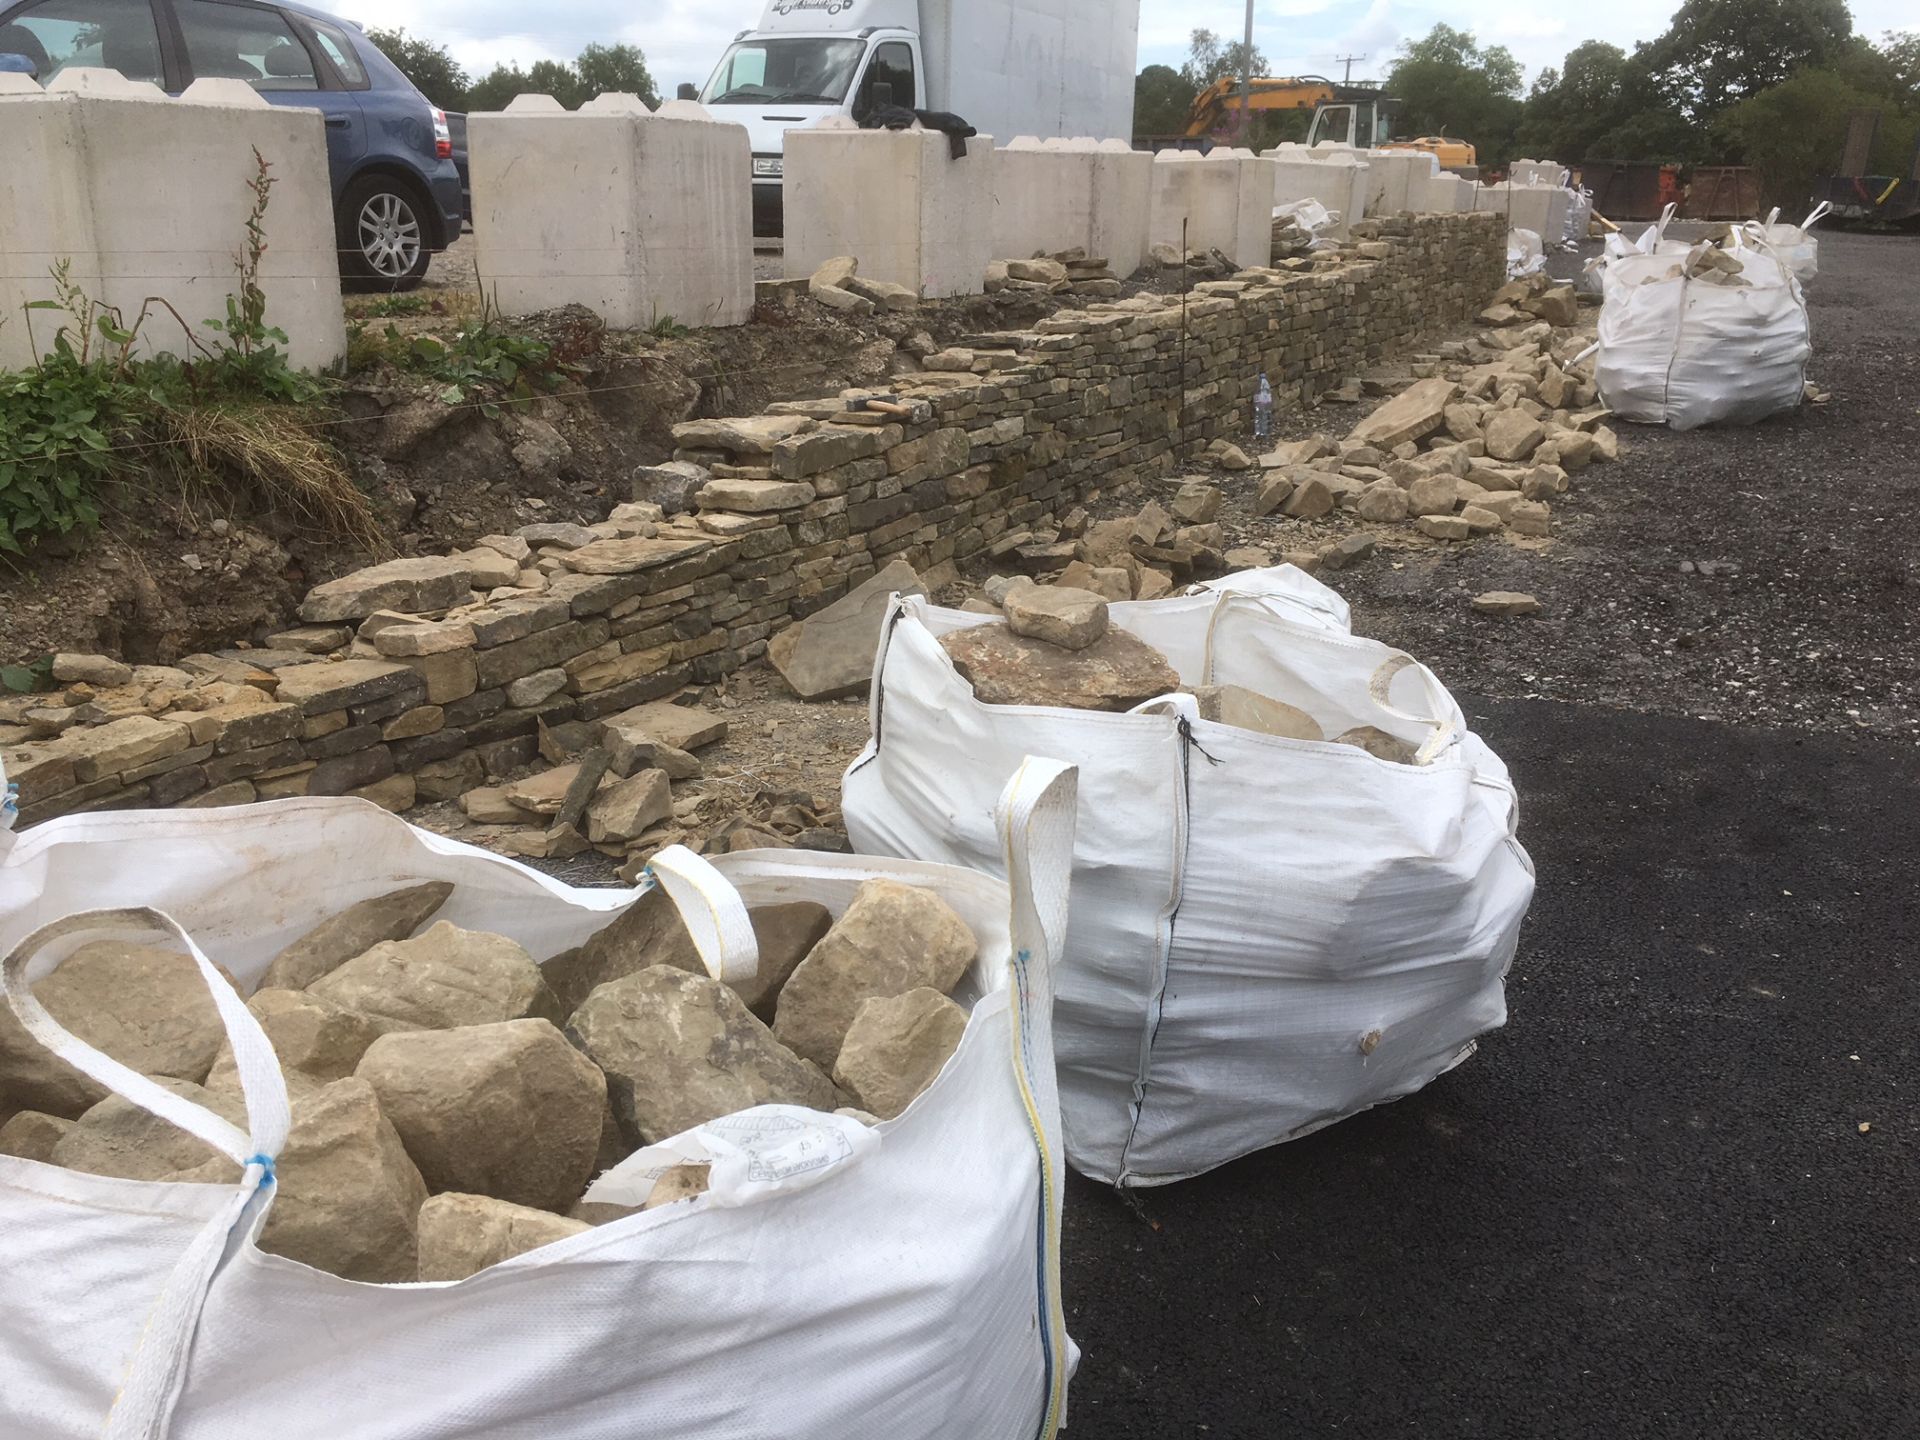 5 bulk bags Yorkshire Dry Stone Walling, each bag 1tonne, which approximately equates to 1m² of - Image 5 of 9